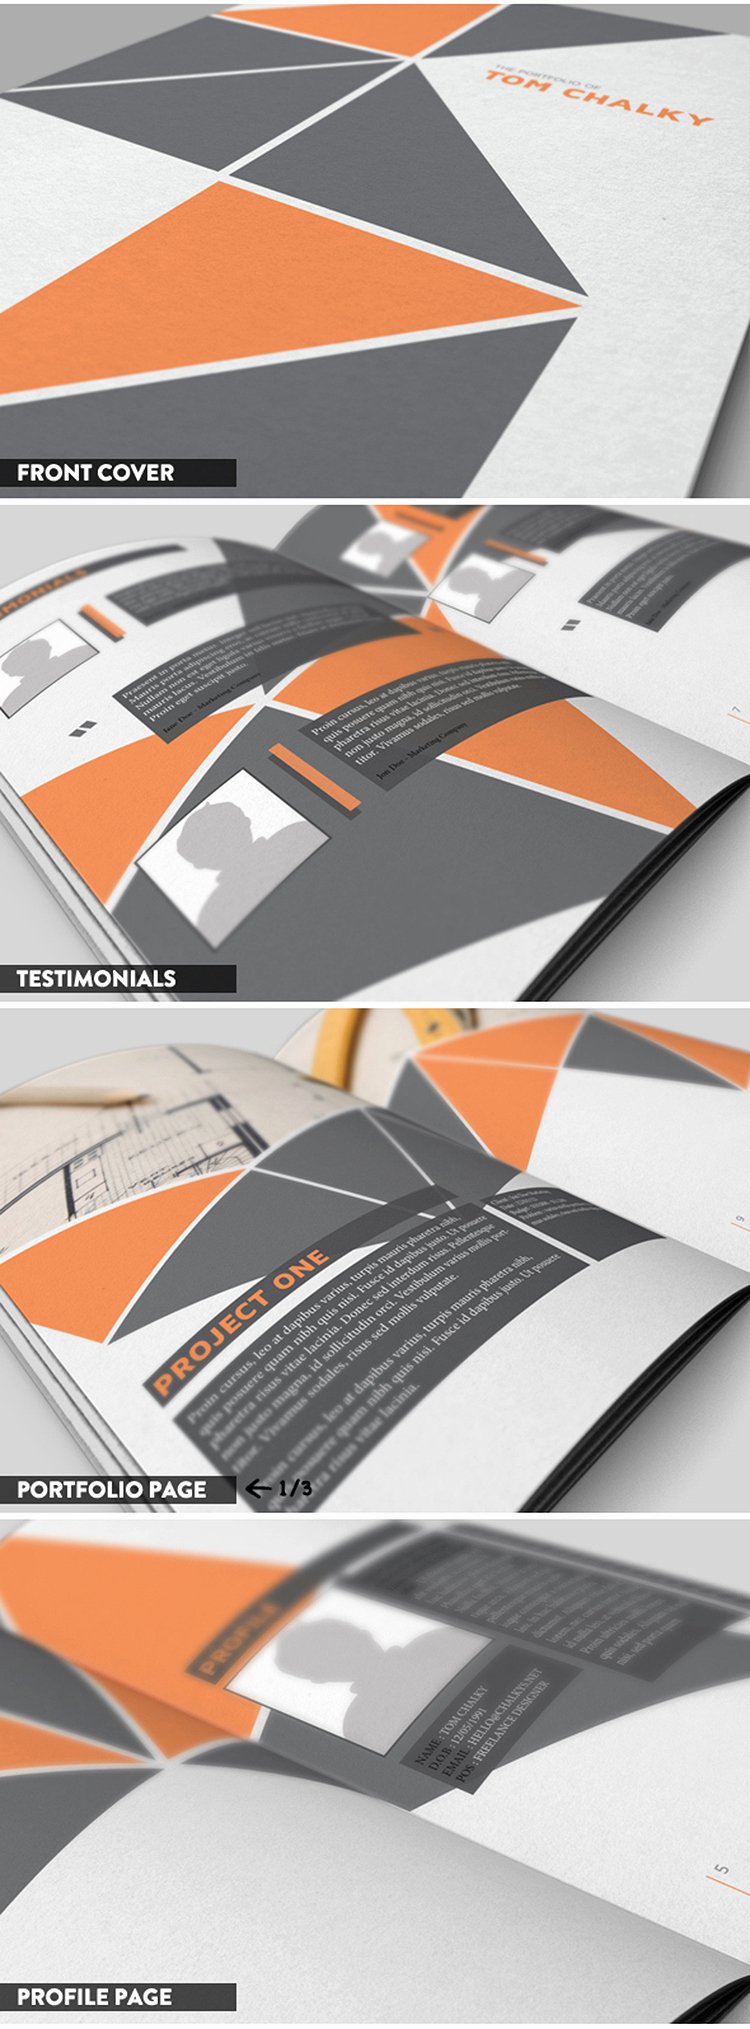 Architecture Portfolio Template Indesign Awesome Free 16 Page Case Study Portfolio Booklet Download